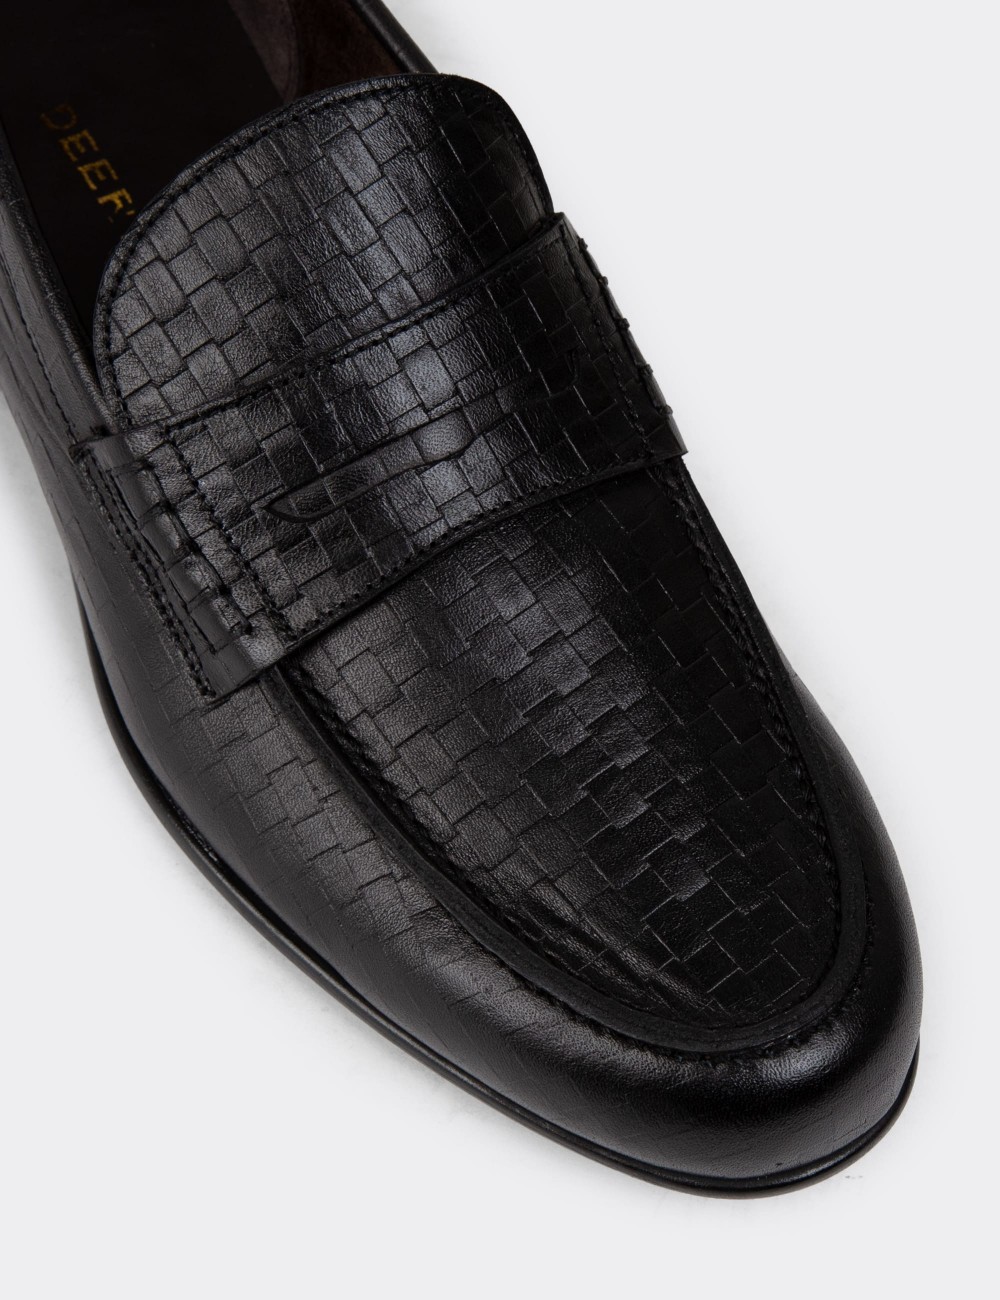 Black Leather Loafers - 01978MSYHC08